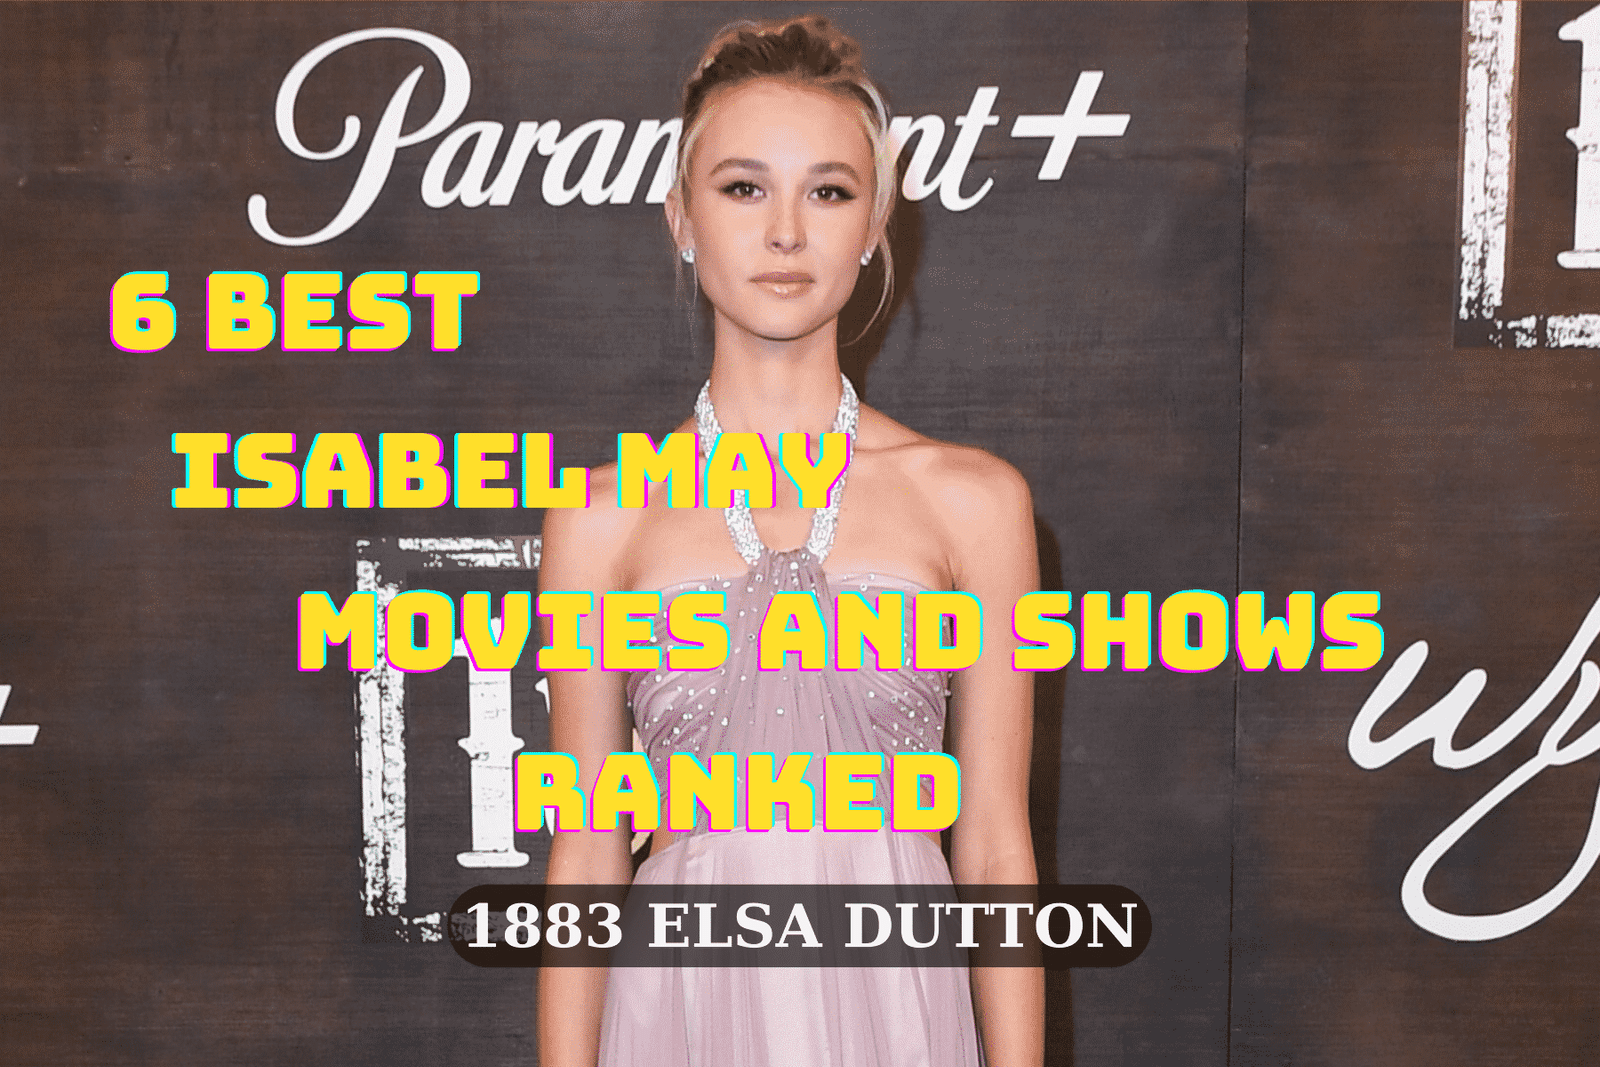 6 Best Isabel May Movies and Shows Ranked - 1883 Elsa Dutton